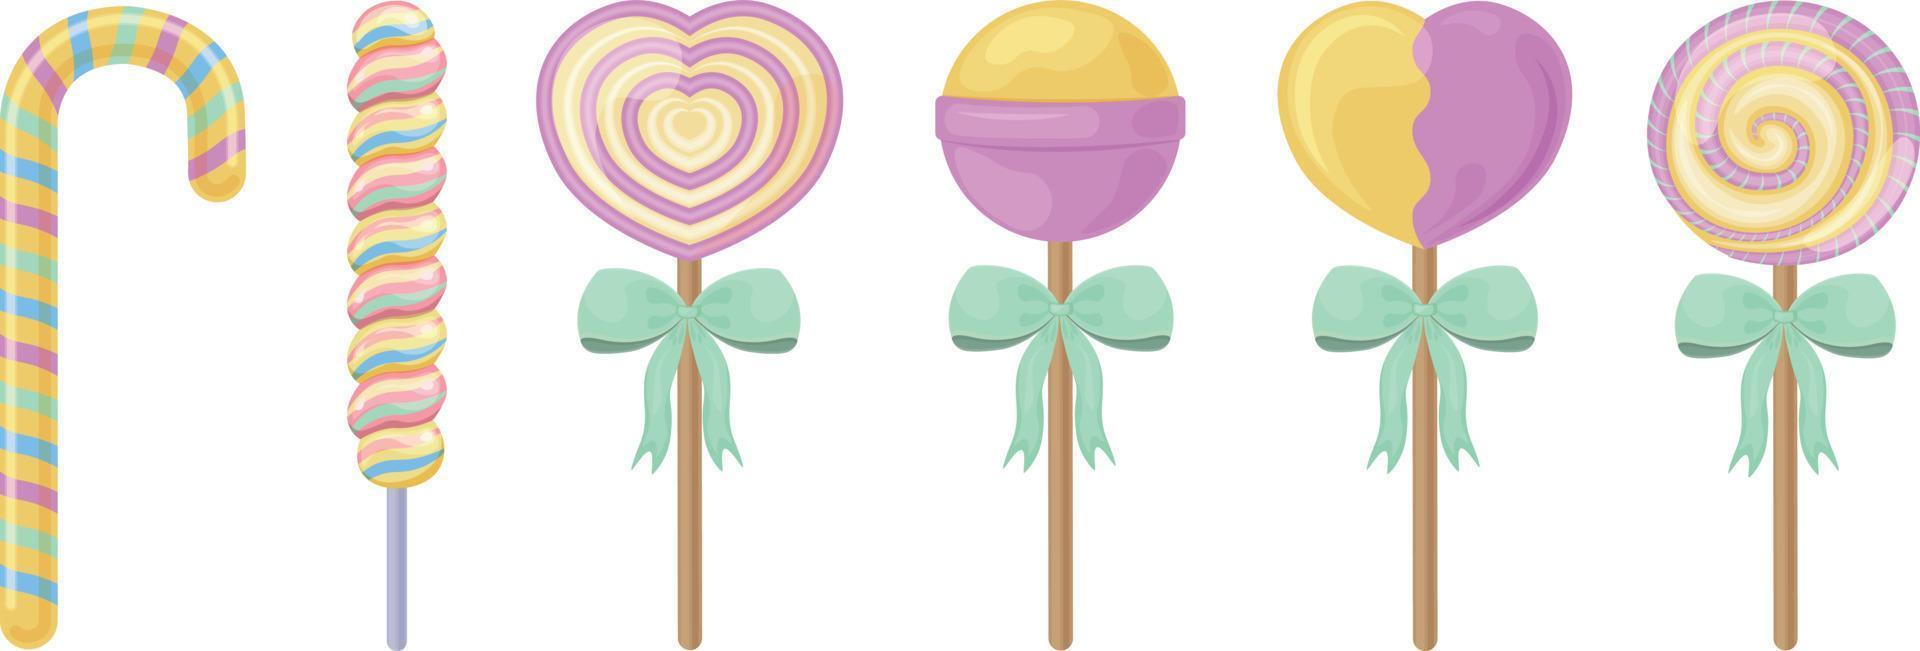 A bright set consisting of colorful candies and candies. Juicy lollipops of various shapes and sizes. Christmas sweets. Holiday candies. Vector illustration